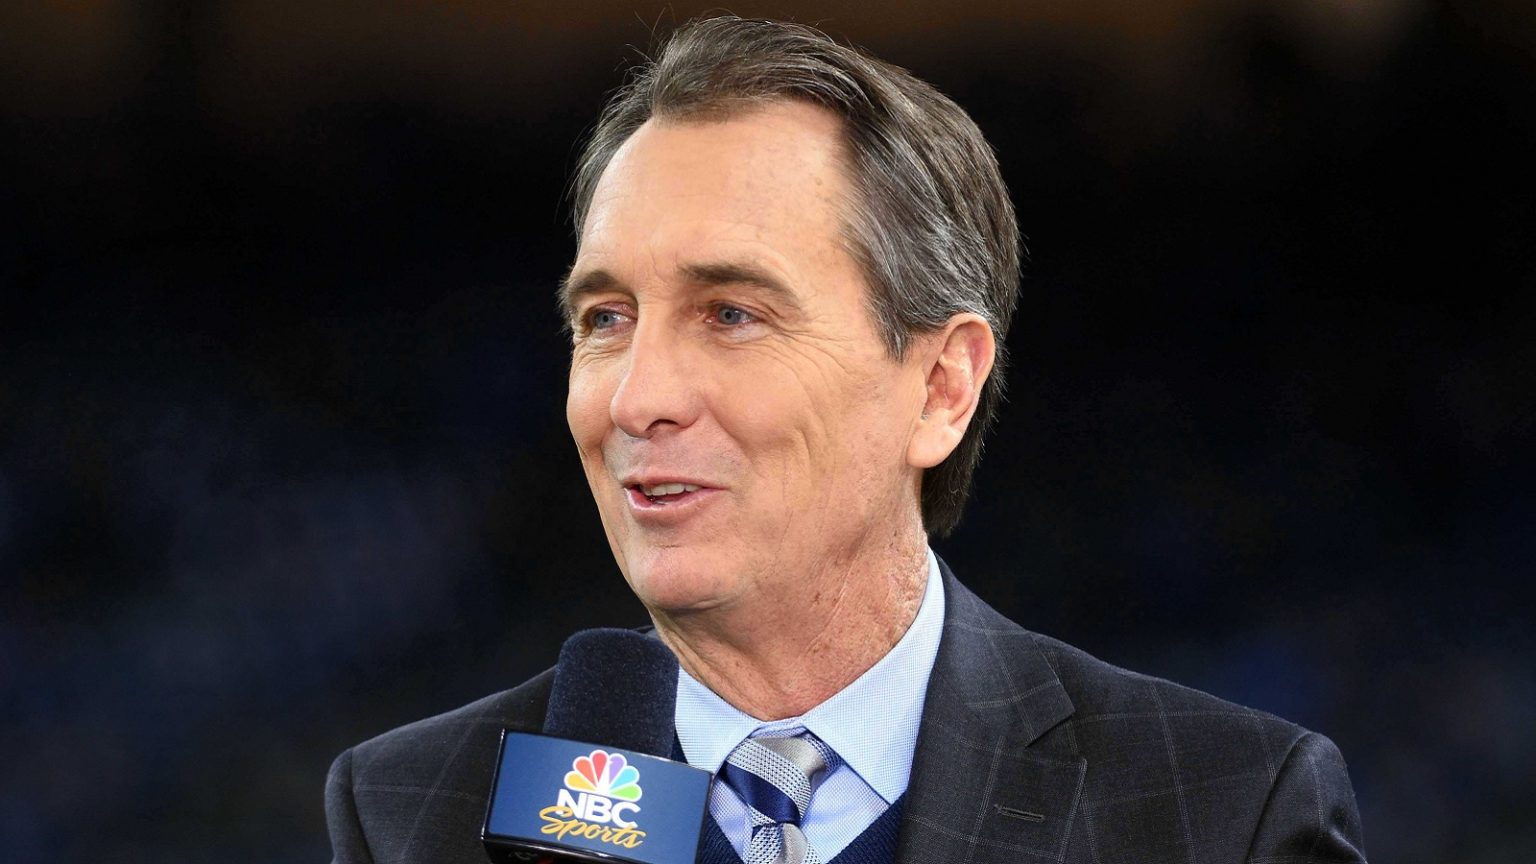 Fans wonder where Cris Collinsworth is for 'Sunday Night Football'